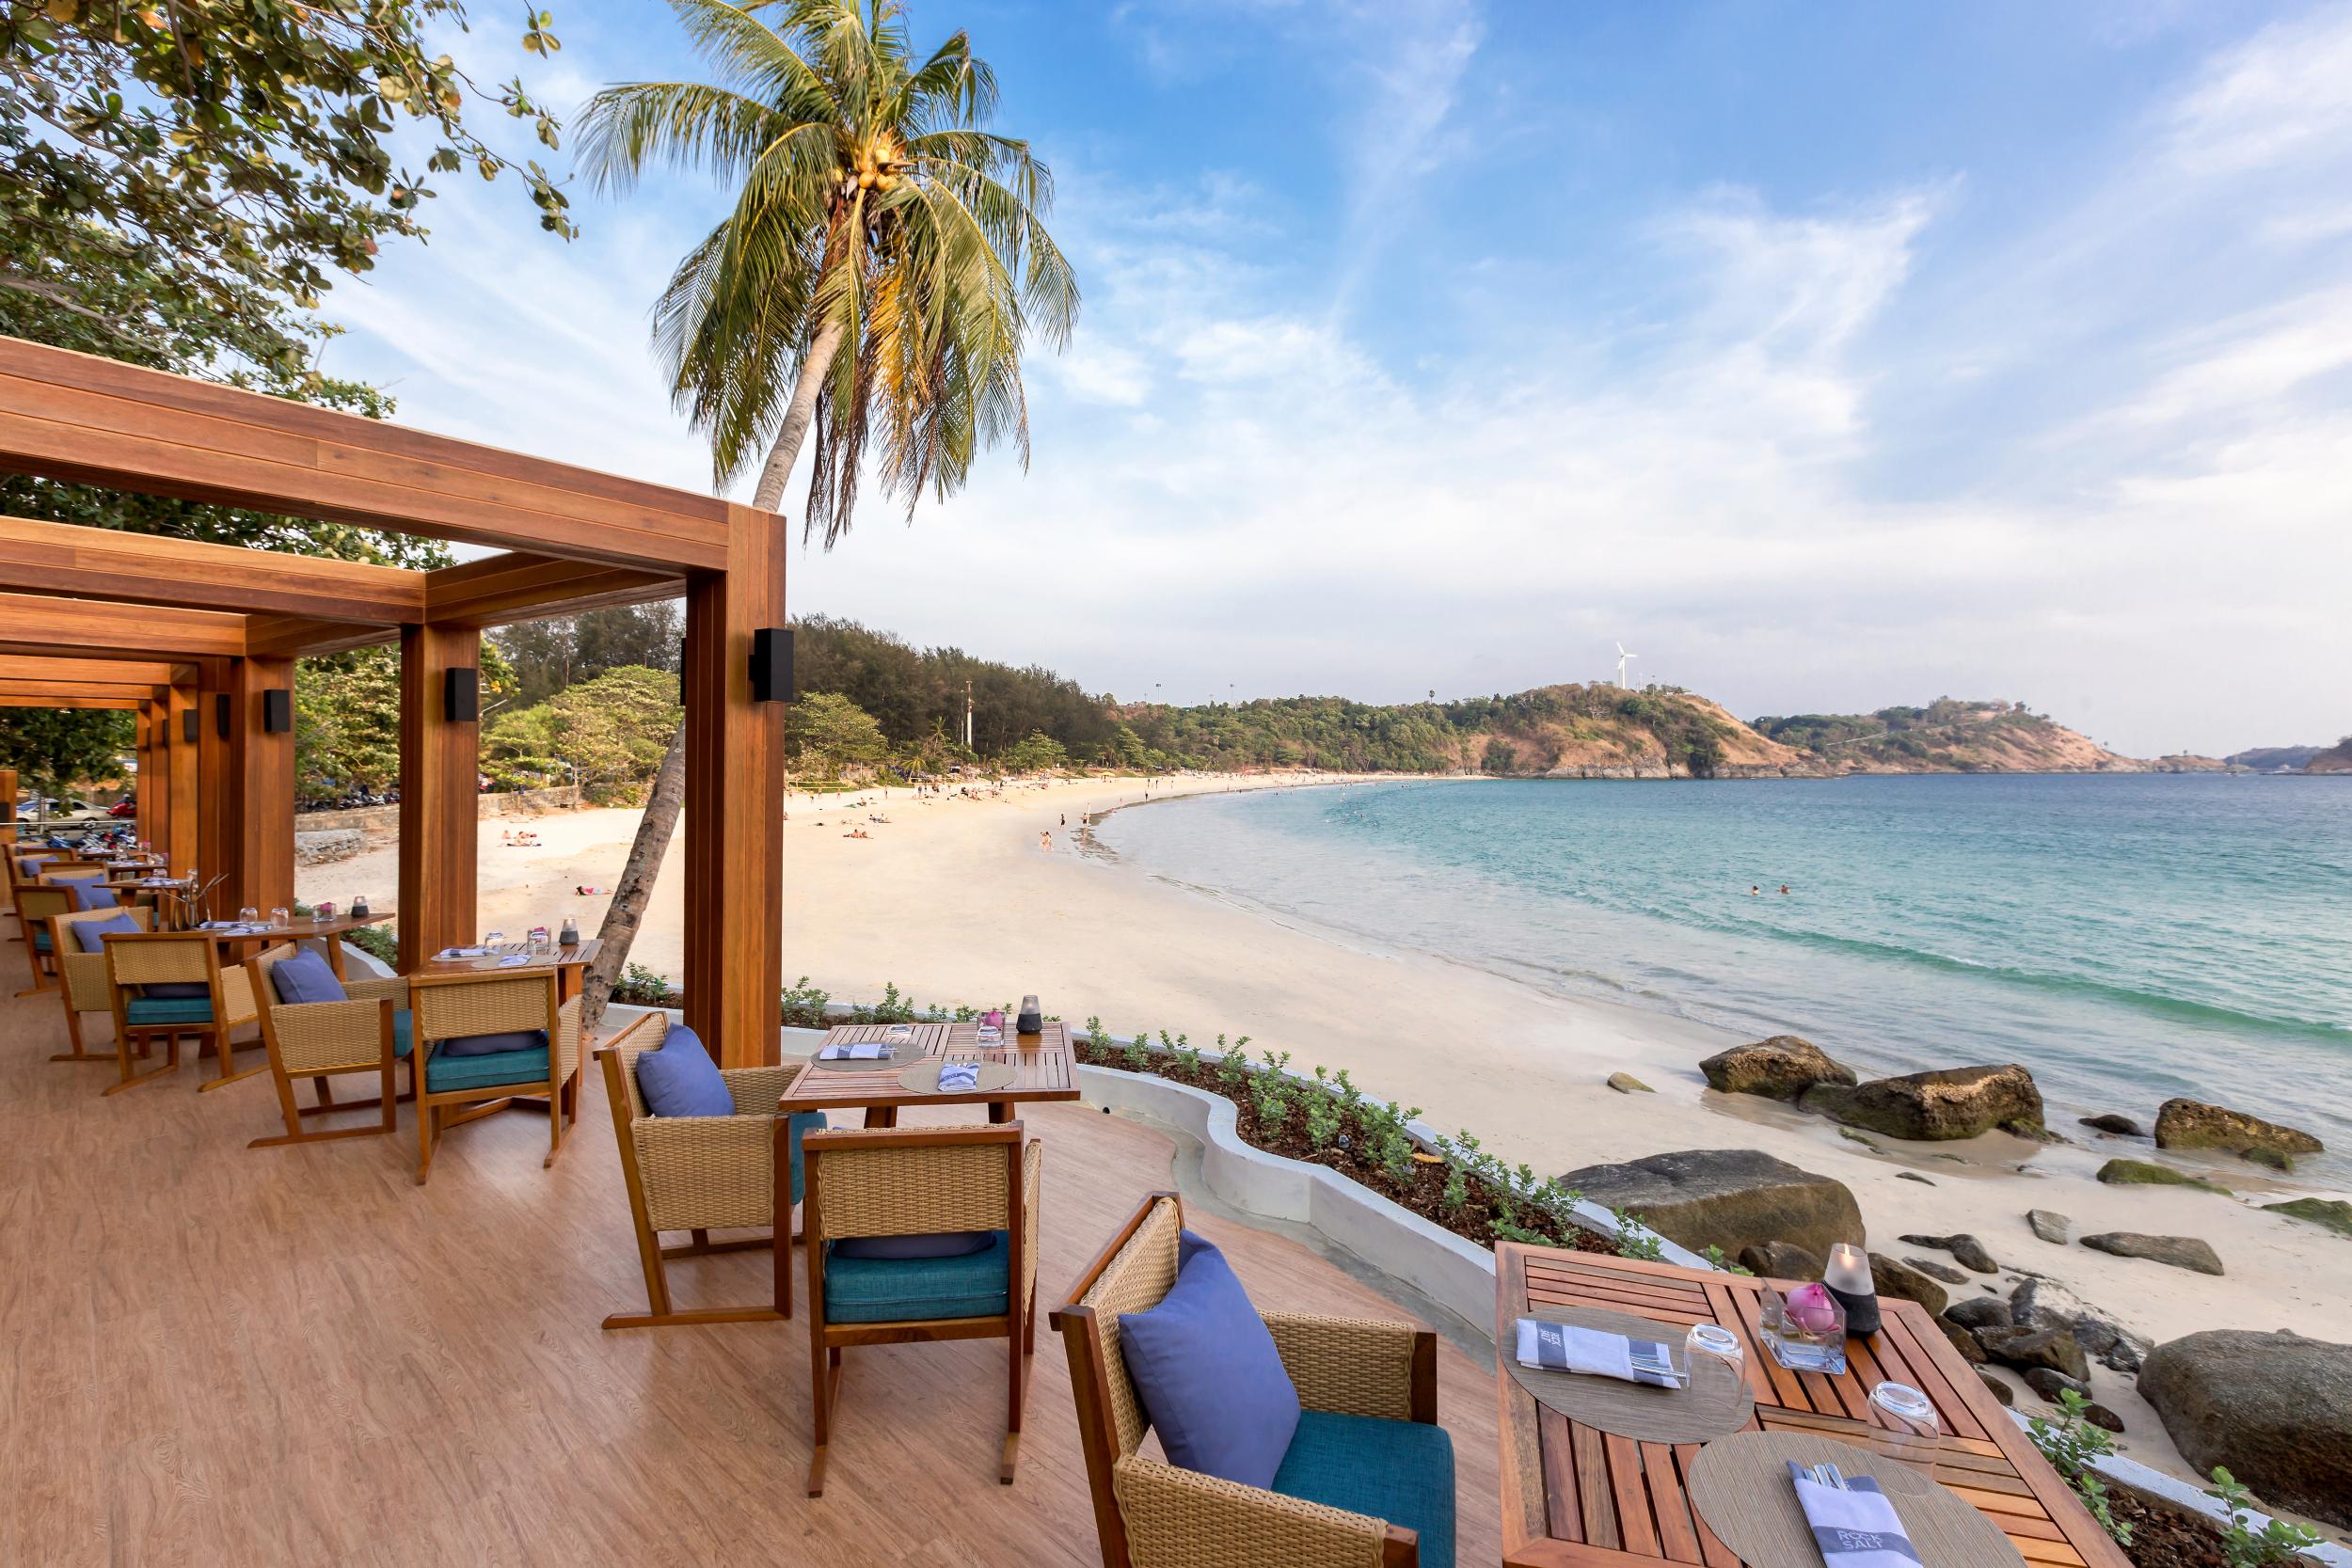 Nai Harn Rock Salt is located on one of the world's best beaches